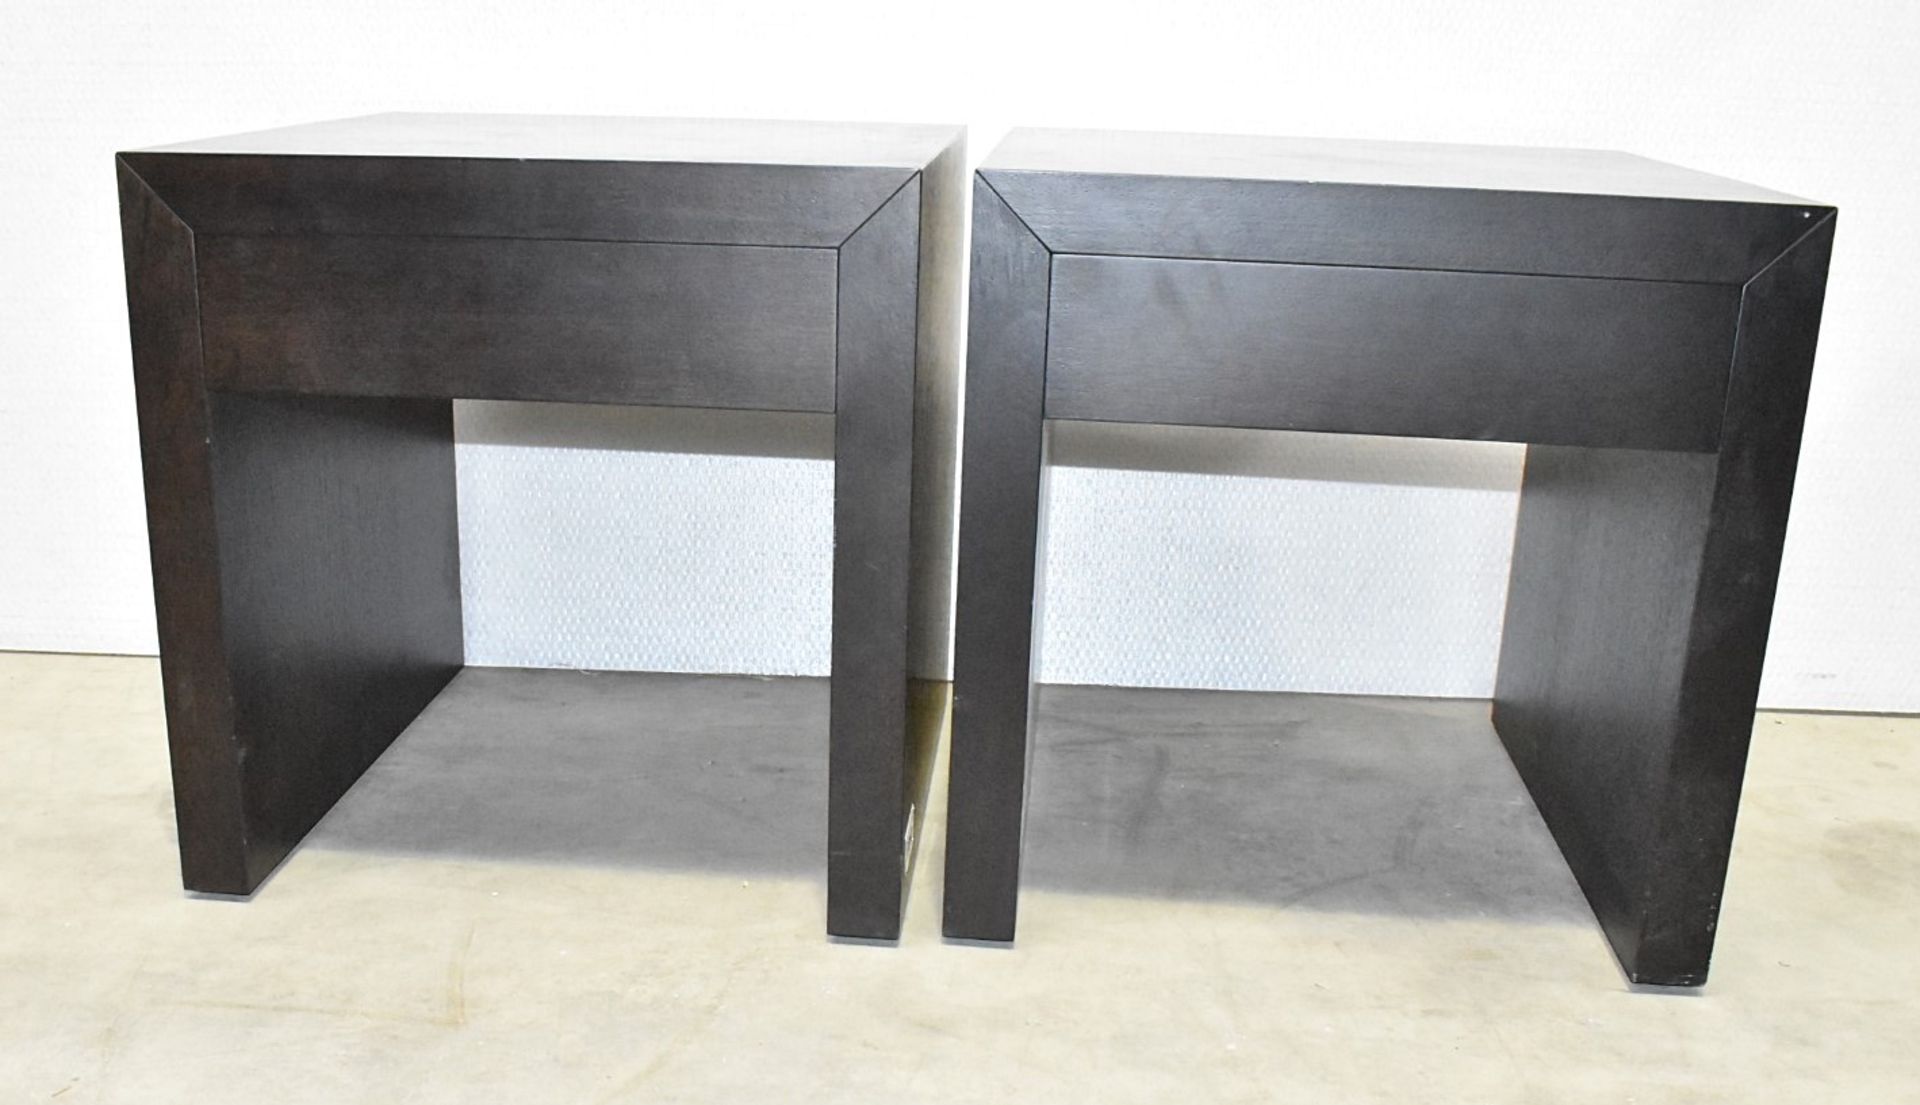 Pair of FENDI Modern Designer Wooden Bedside Cabinets Featuring Suede-style Lined 1-Drawer Storage - Image 9 of 15